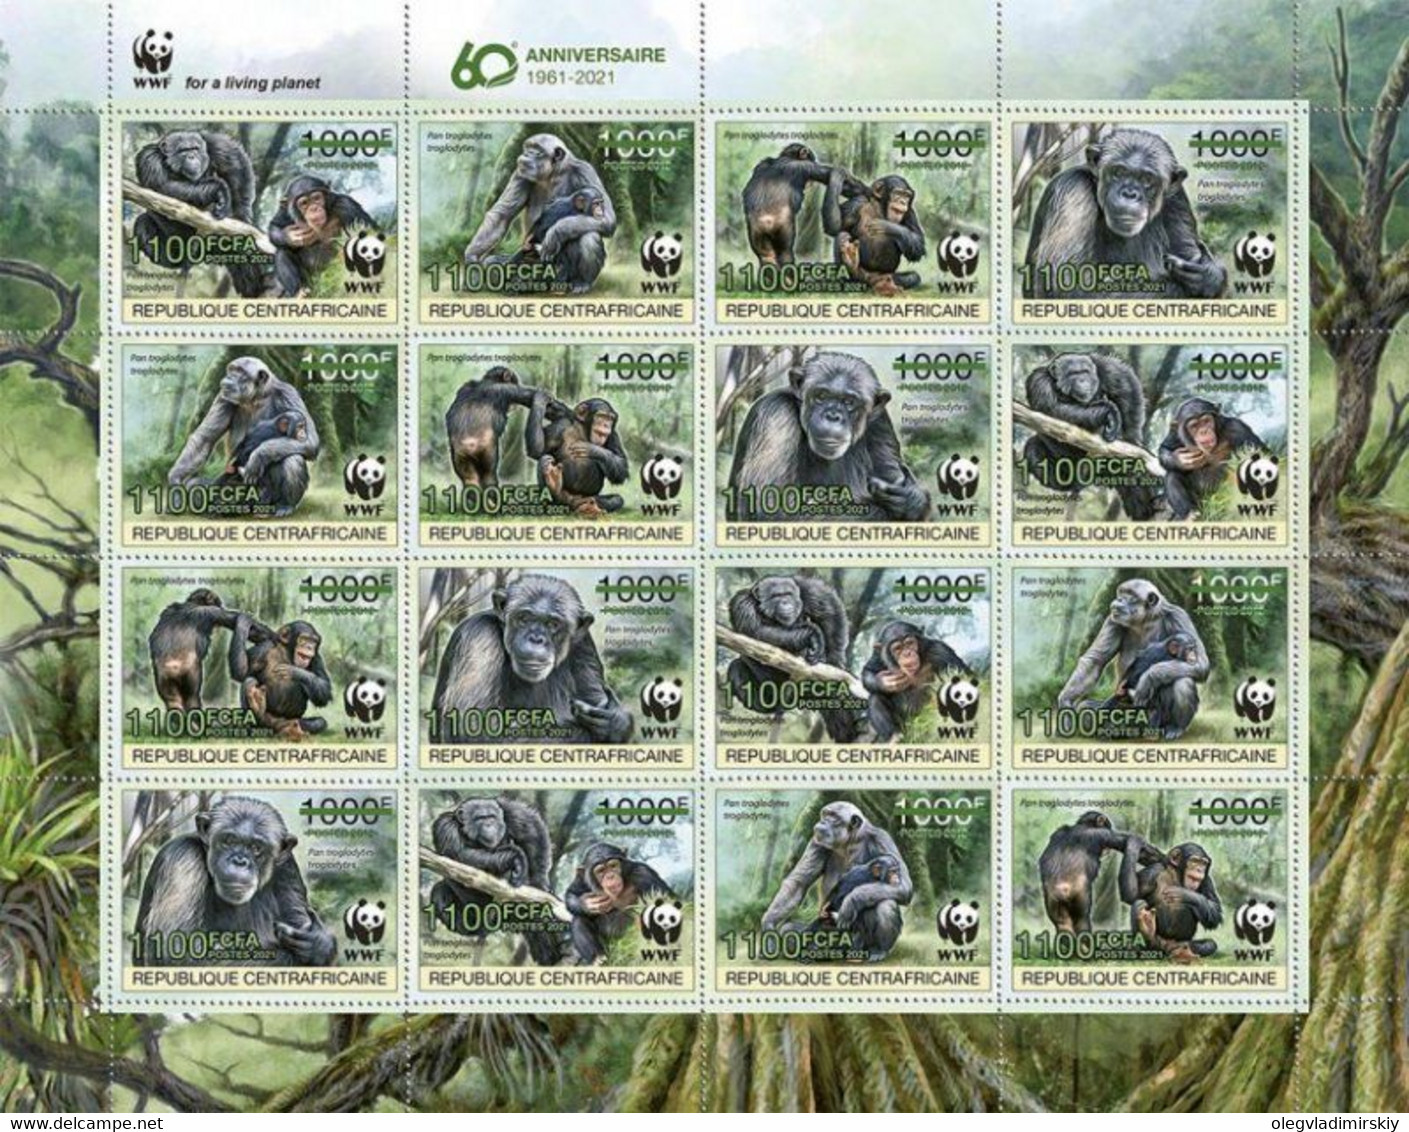 Central African Republic 2021 WWF Chimpanzee Sheet Of 4 Strips Of 4 Stamps Overprinted With Green Foil - Chimpanzees